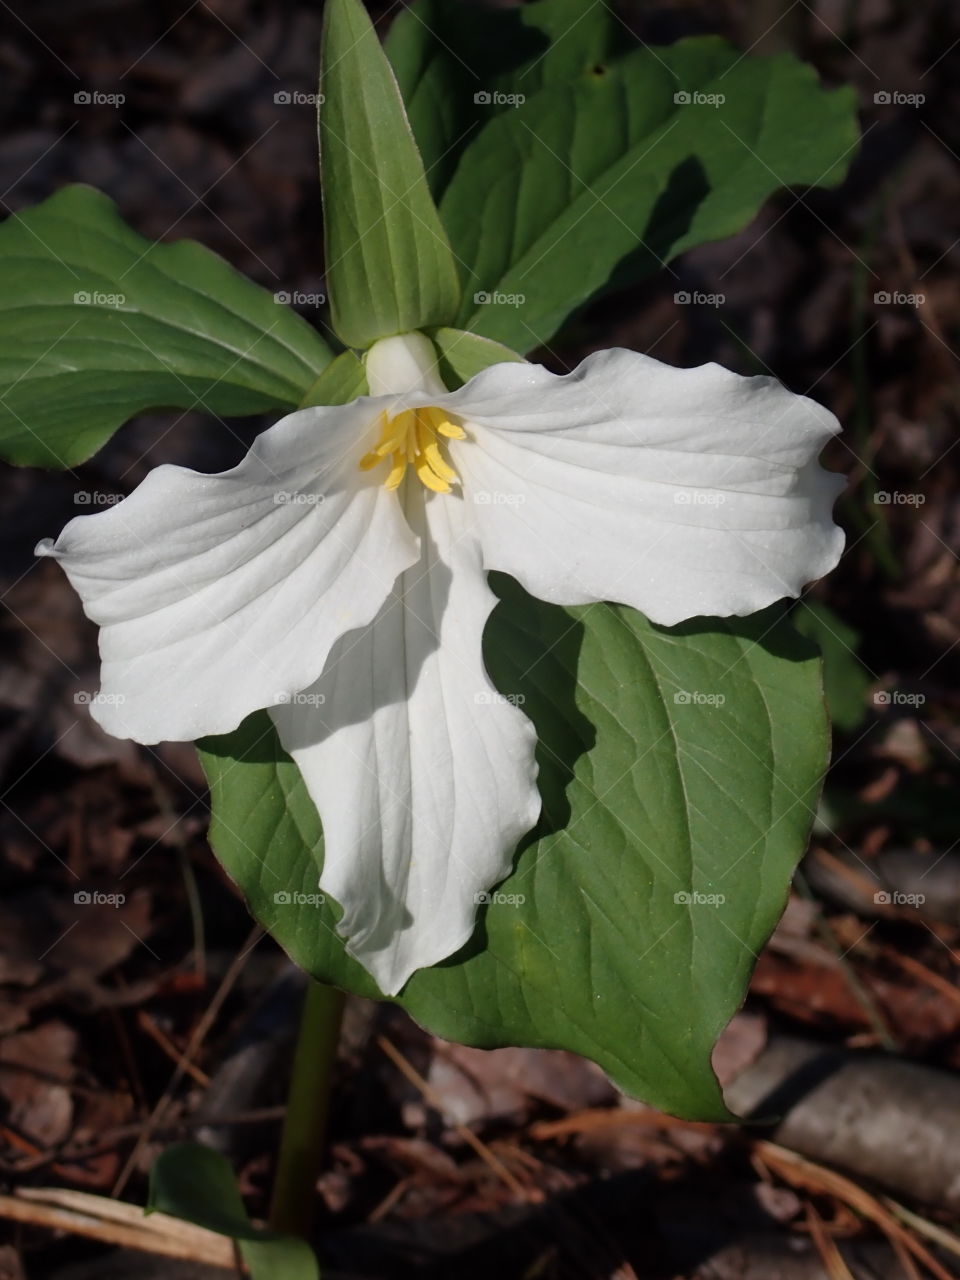 White trillium flower with green leaves growing in the forest